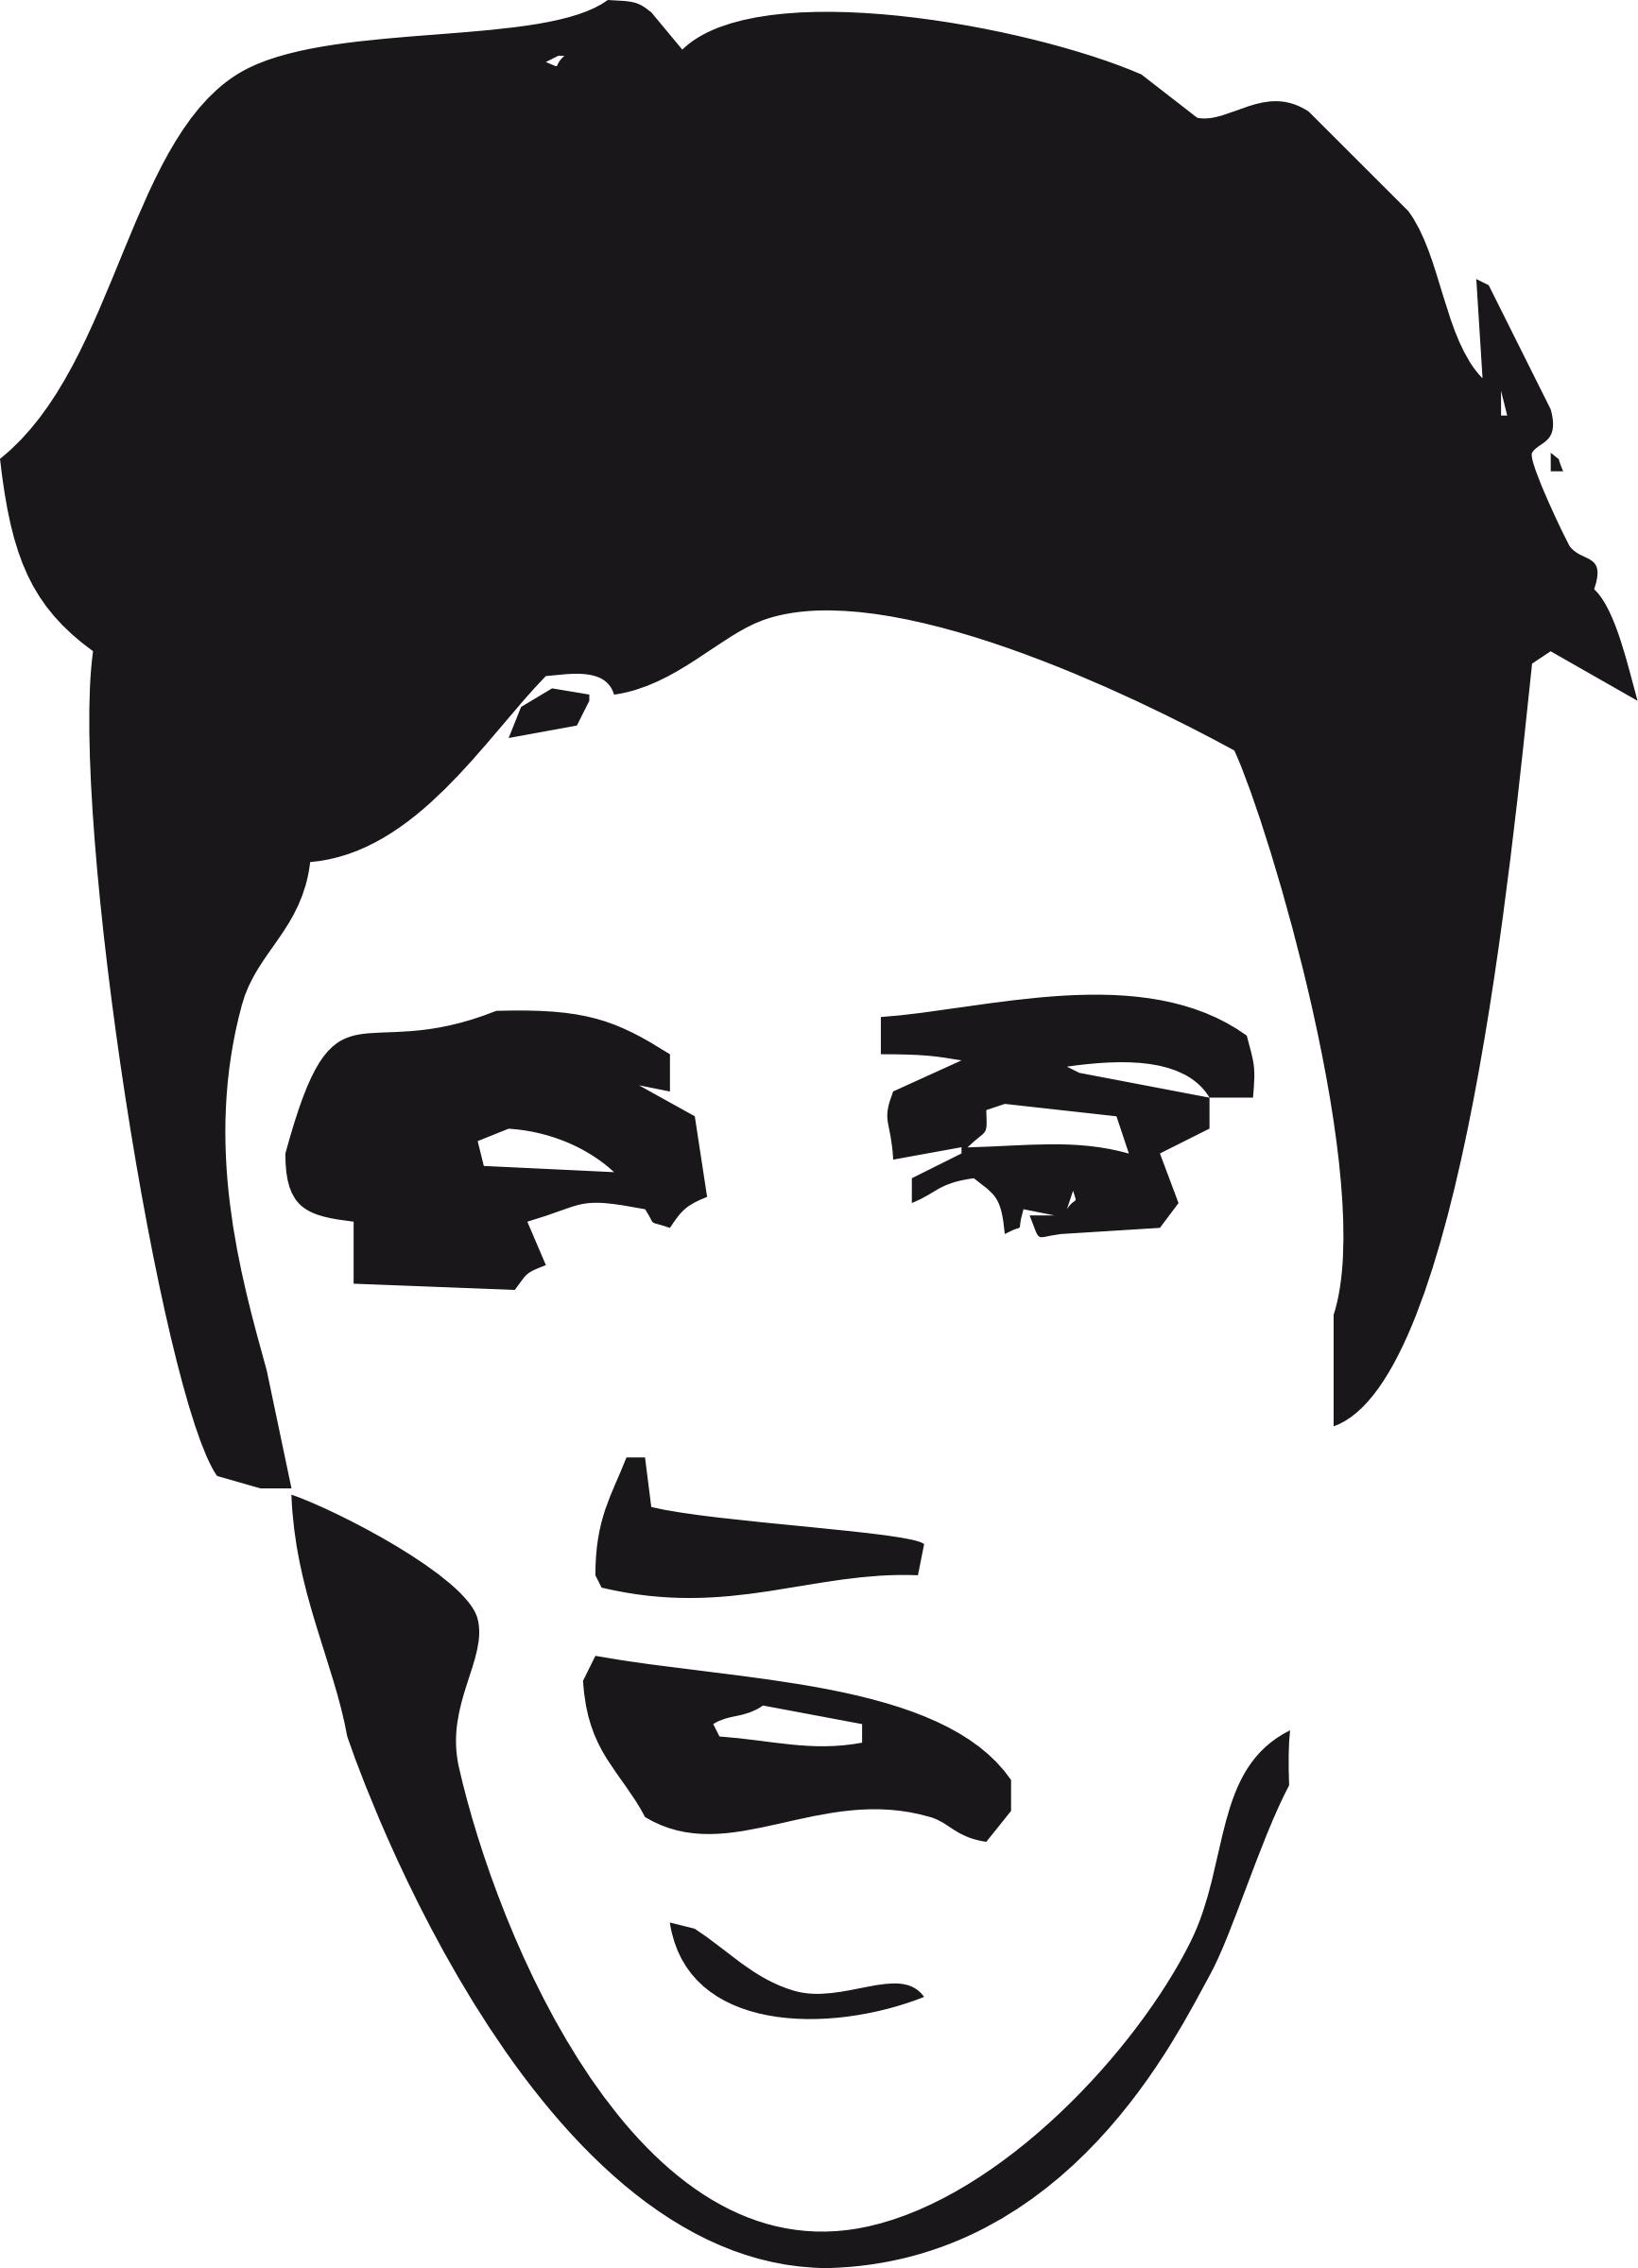 Elvis face PNG icons